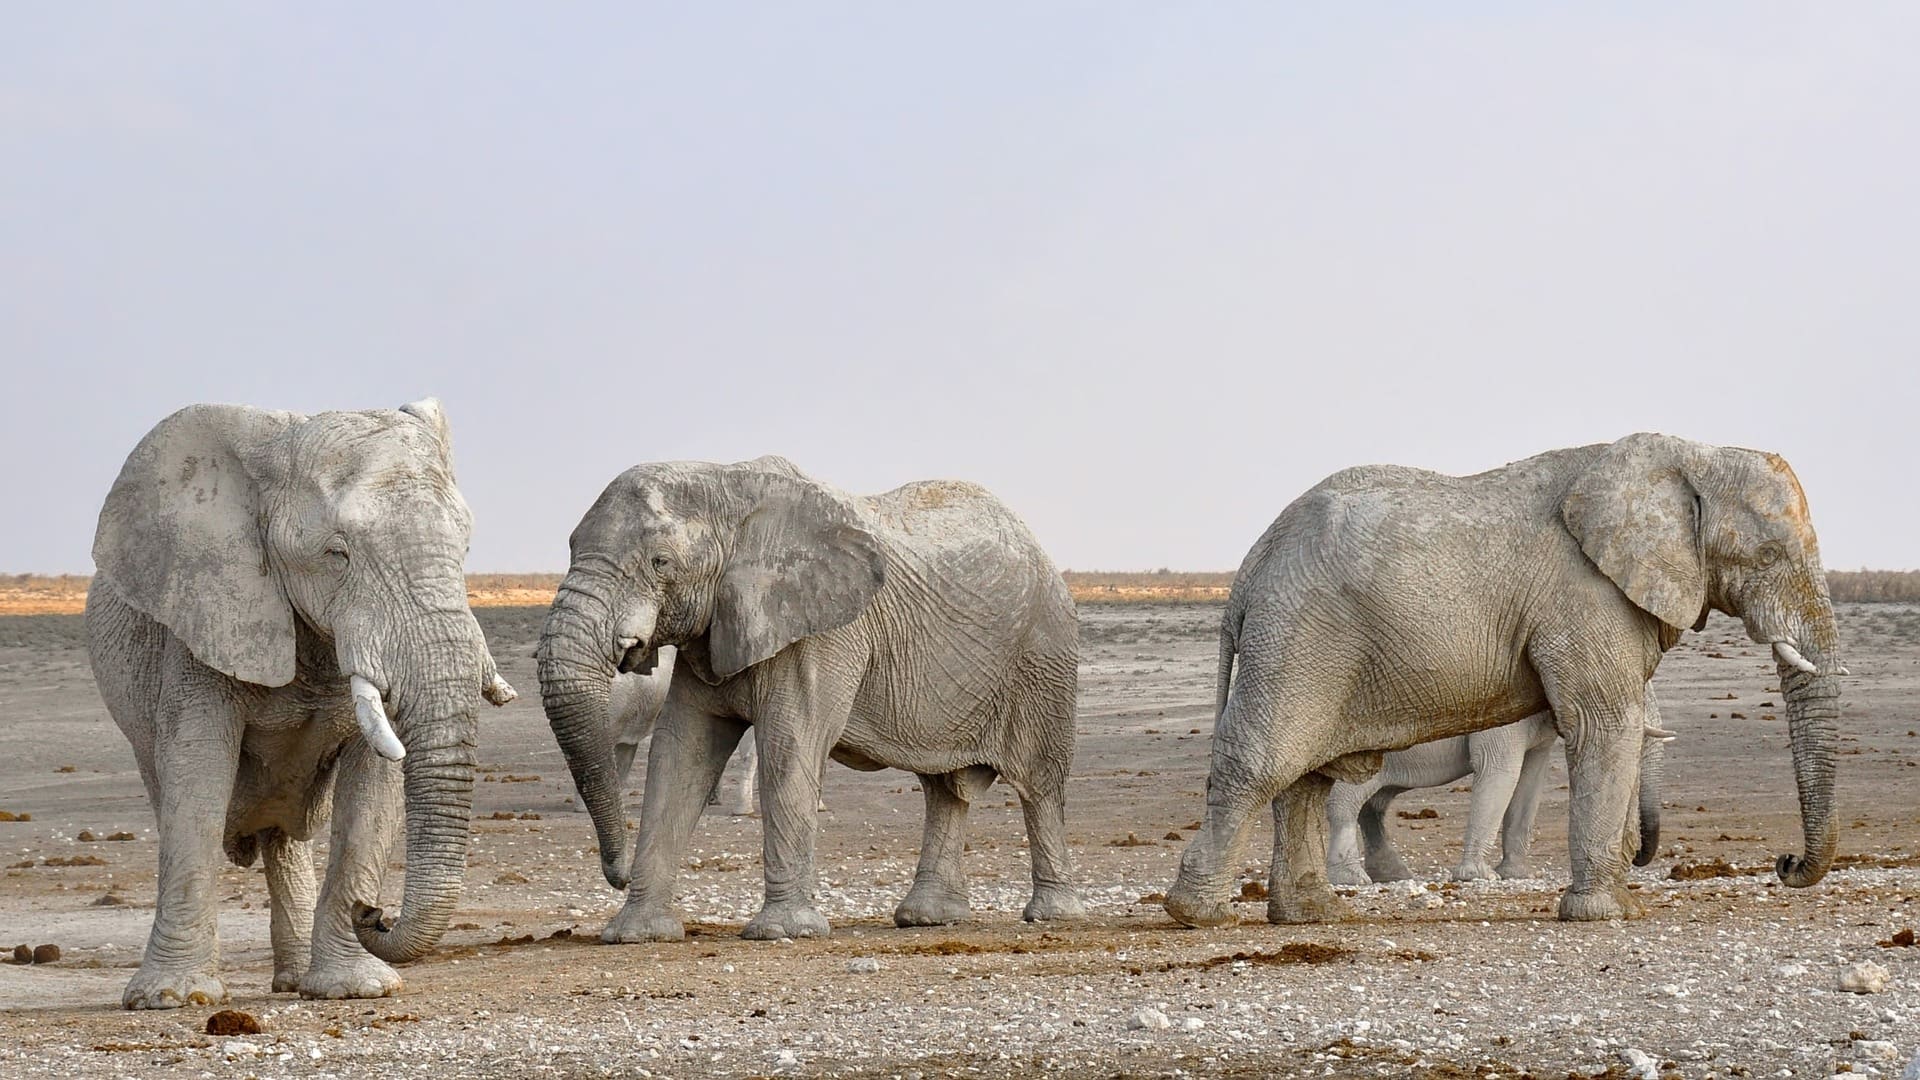 The 'great whites' of Etosha National Park - 14 Spectacular National Parks In Africa